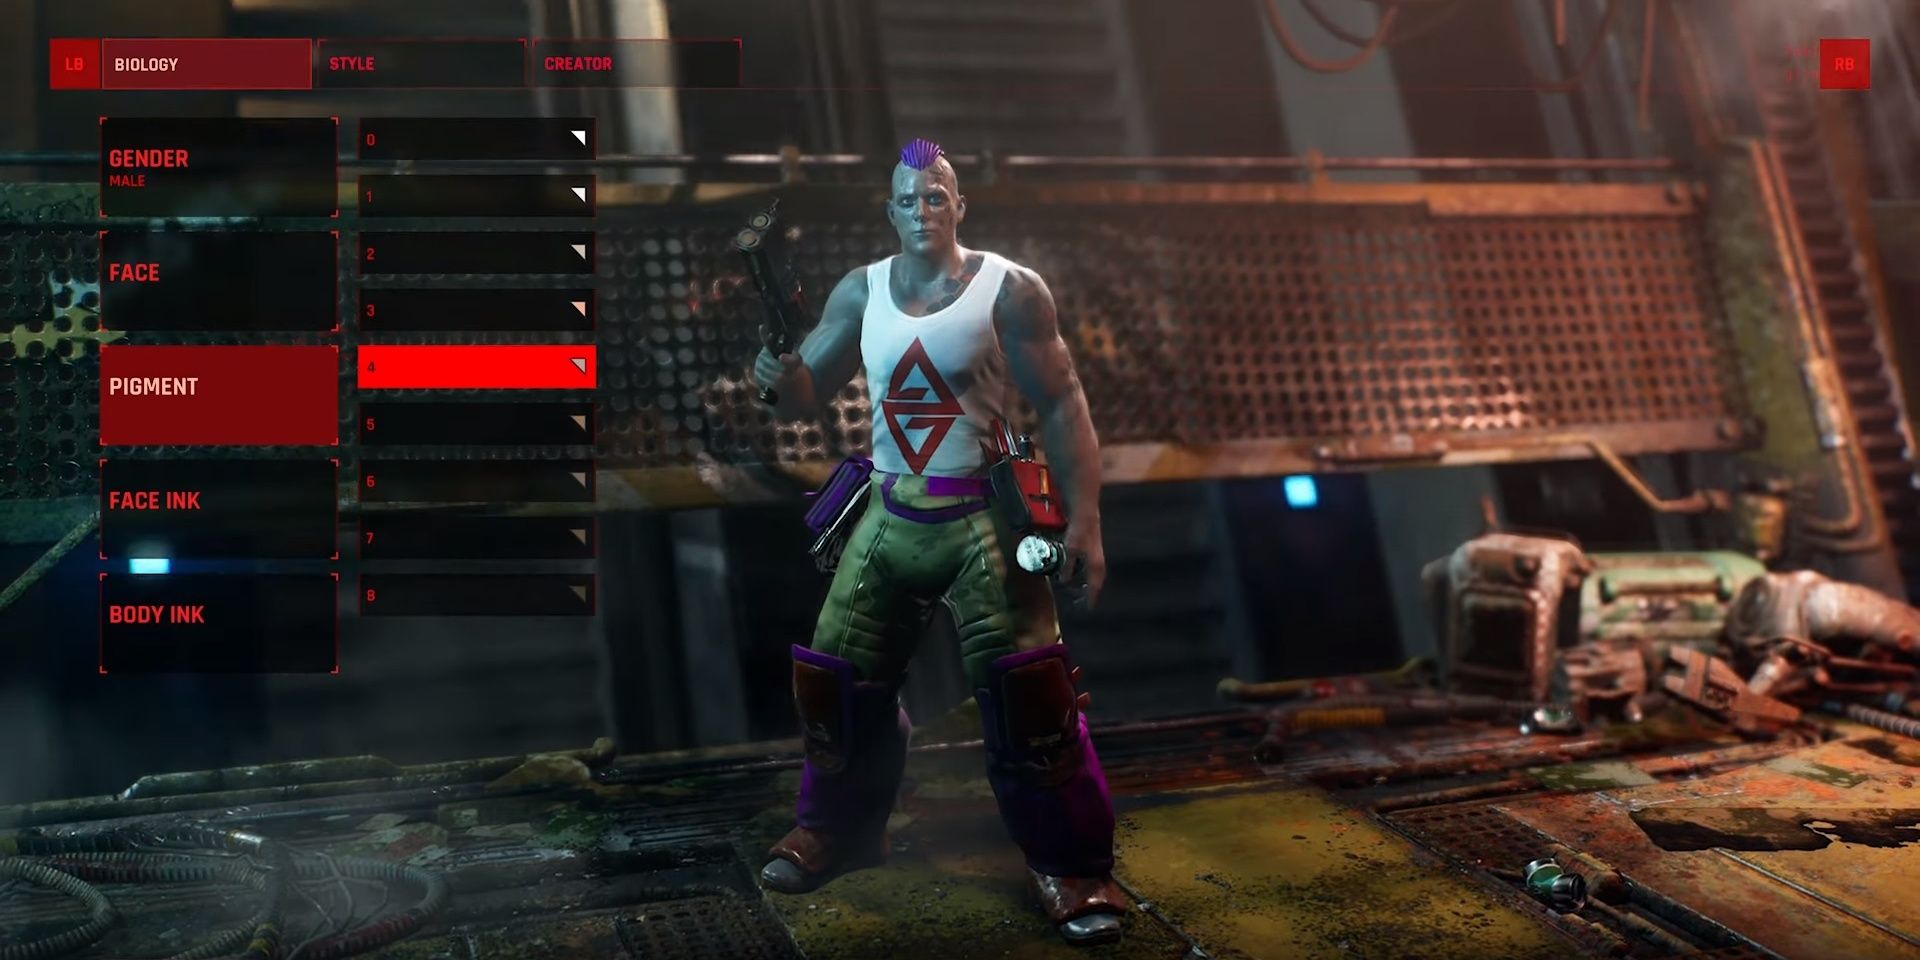 A screenshot showing character customization options in The Ascent